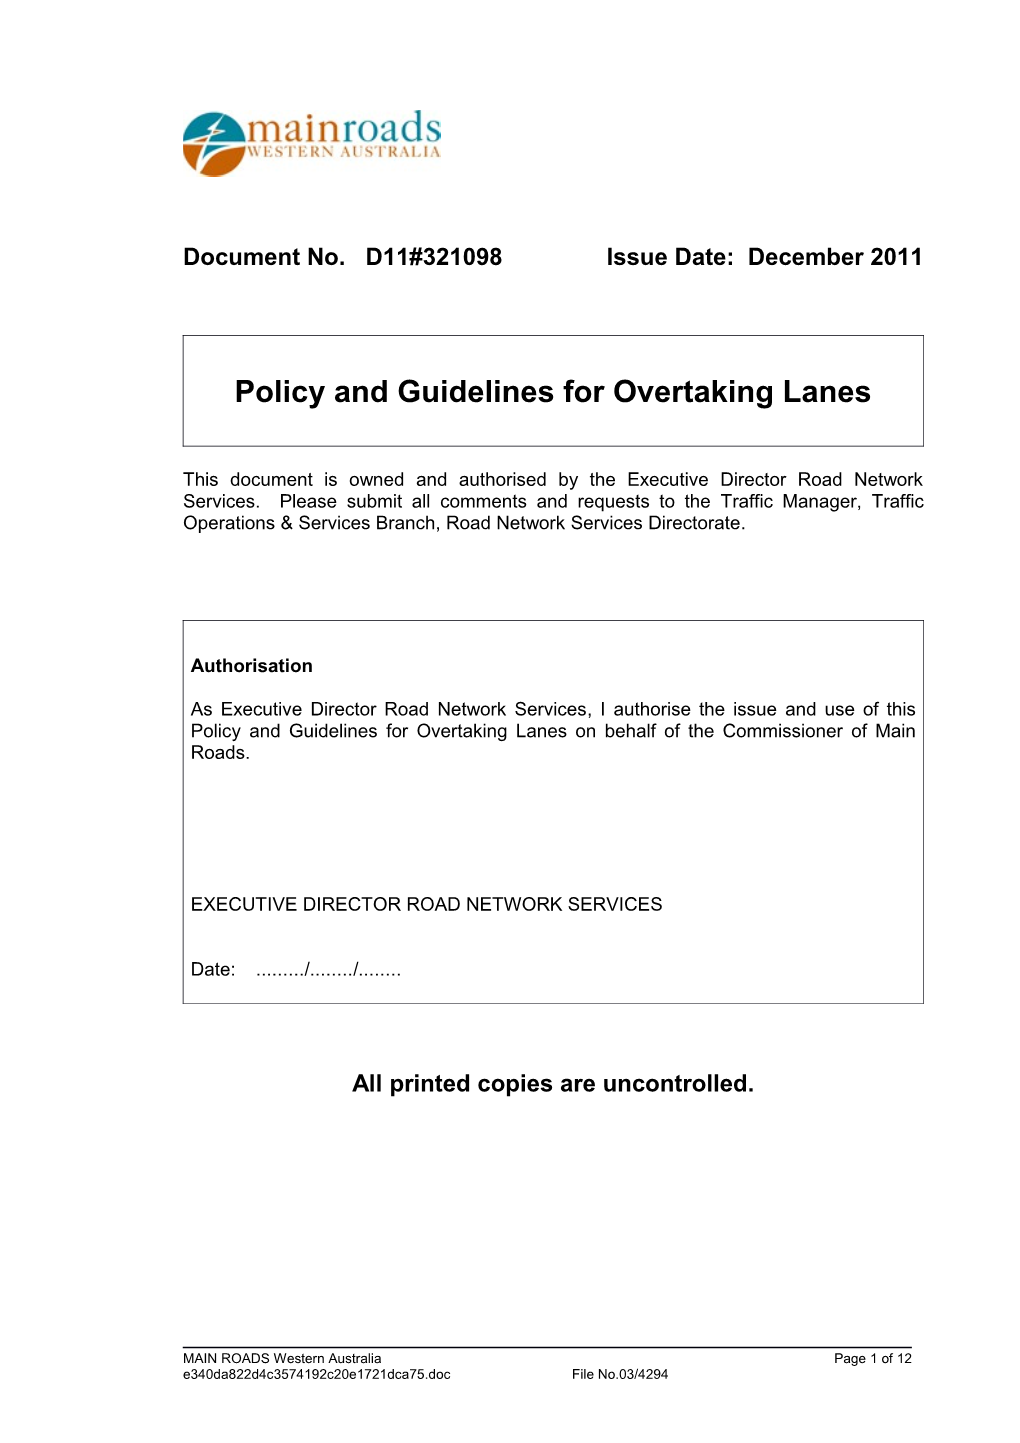 Policy and Guidelines for Overtaking Lanes